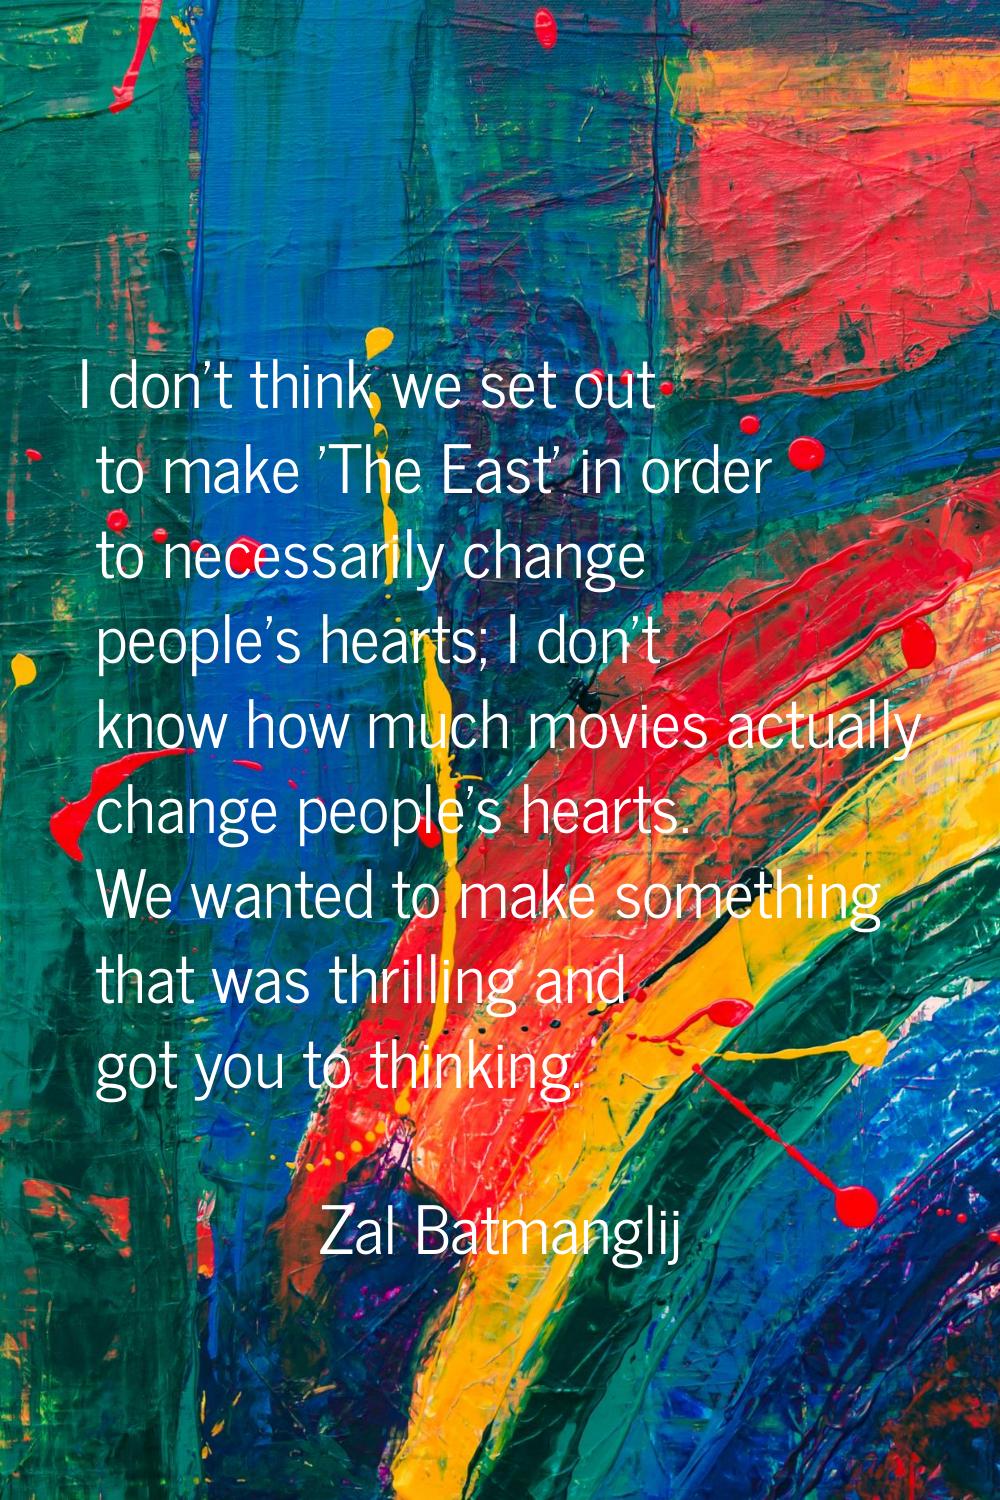 I don't think we set out to make 'The East' in order to necessarily change people's hearts; I don't